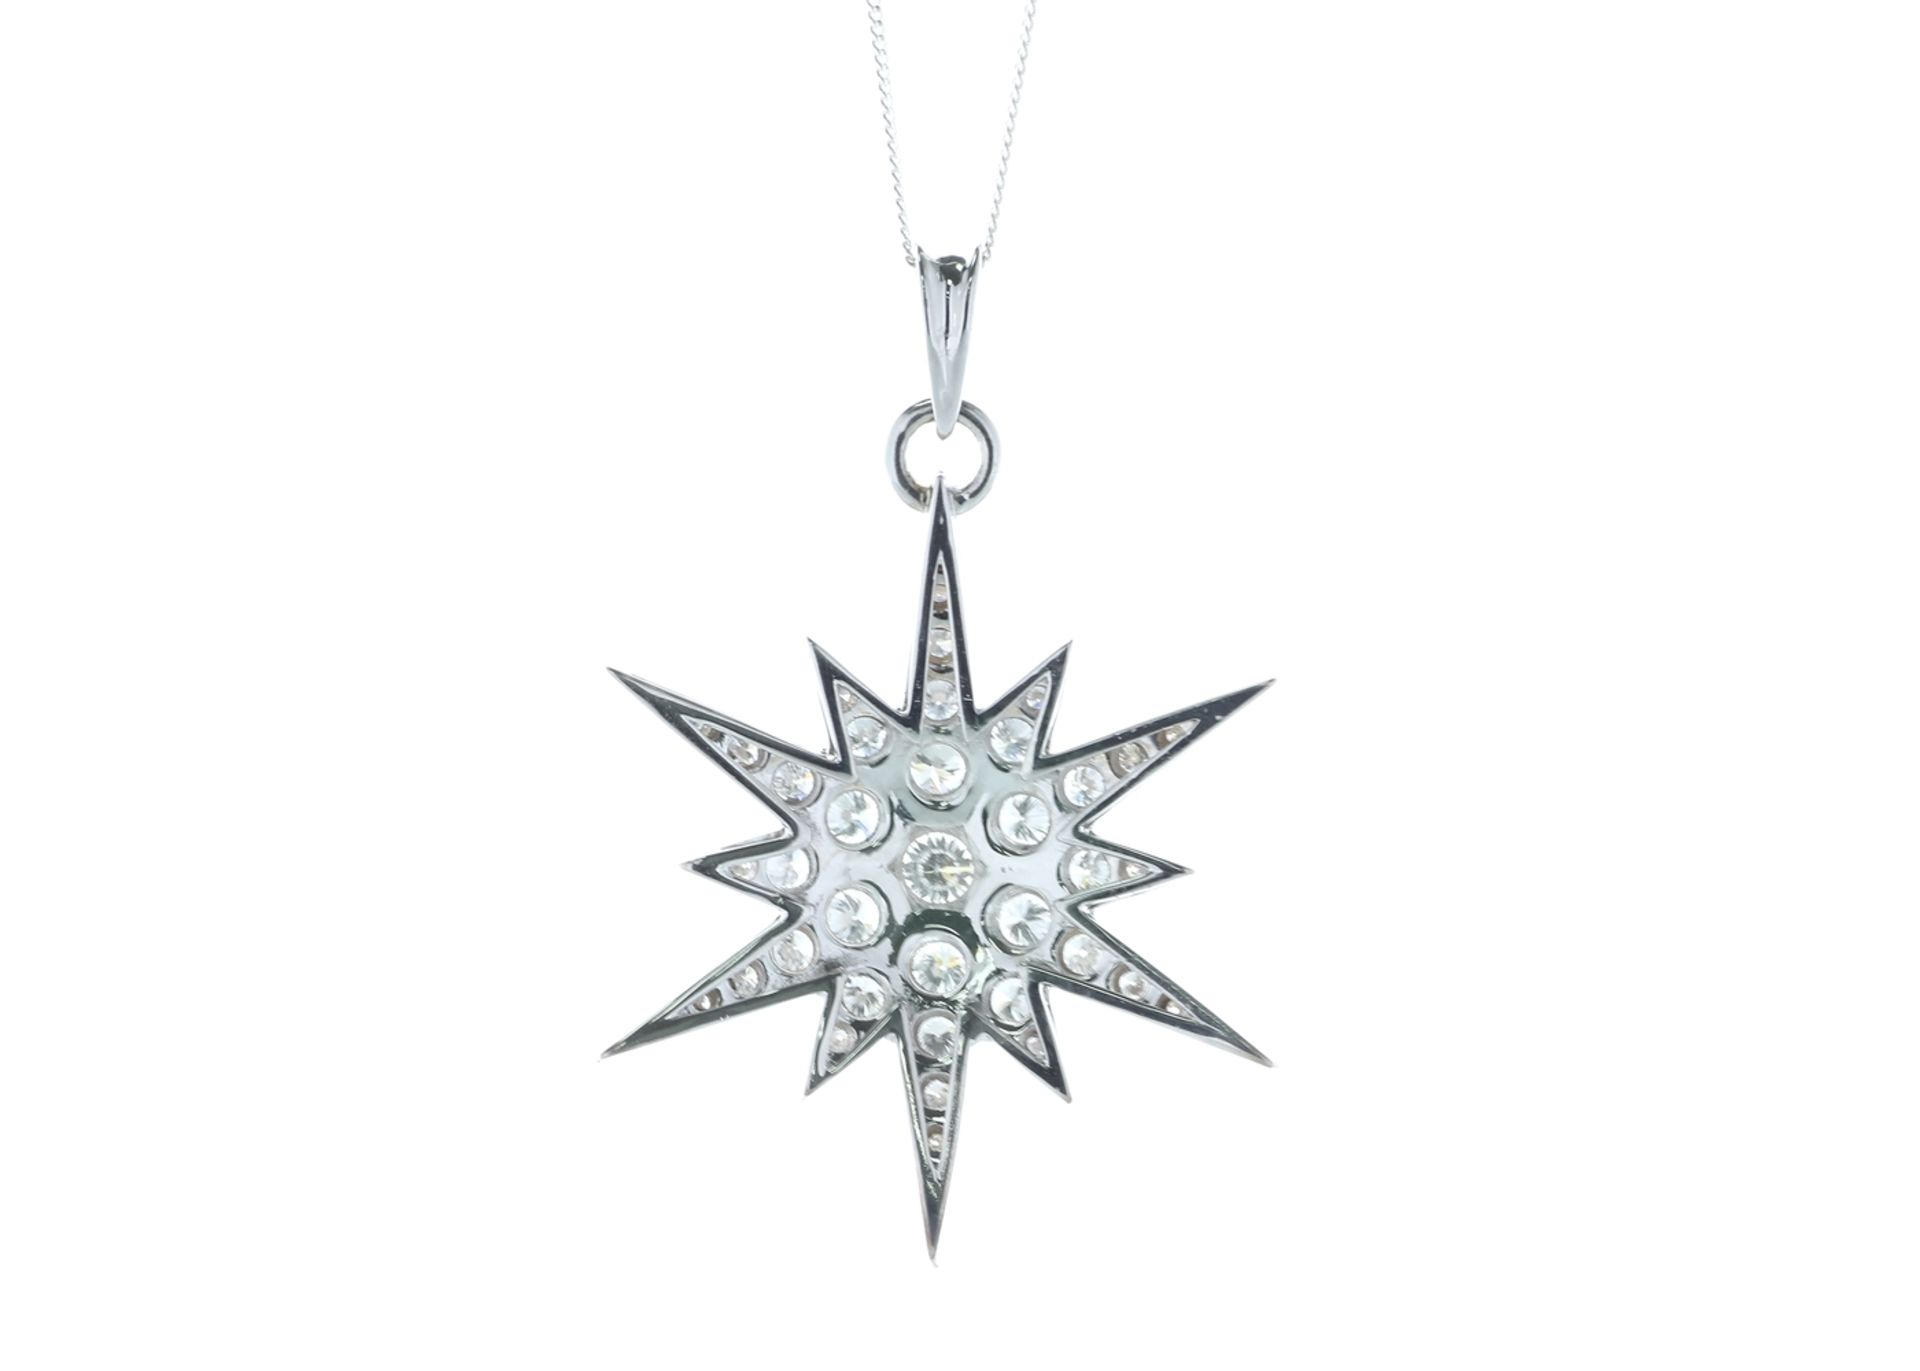 18ct White Gold Star Shape Diamond Pendant 2.84 Carats - Valued by IDI £19,500.00 - 18ct White - Image 4 of 5